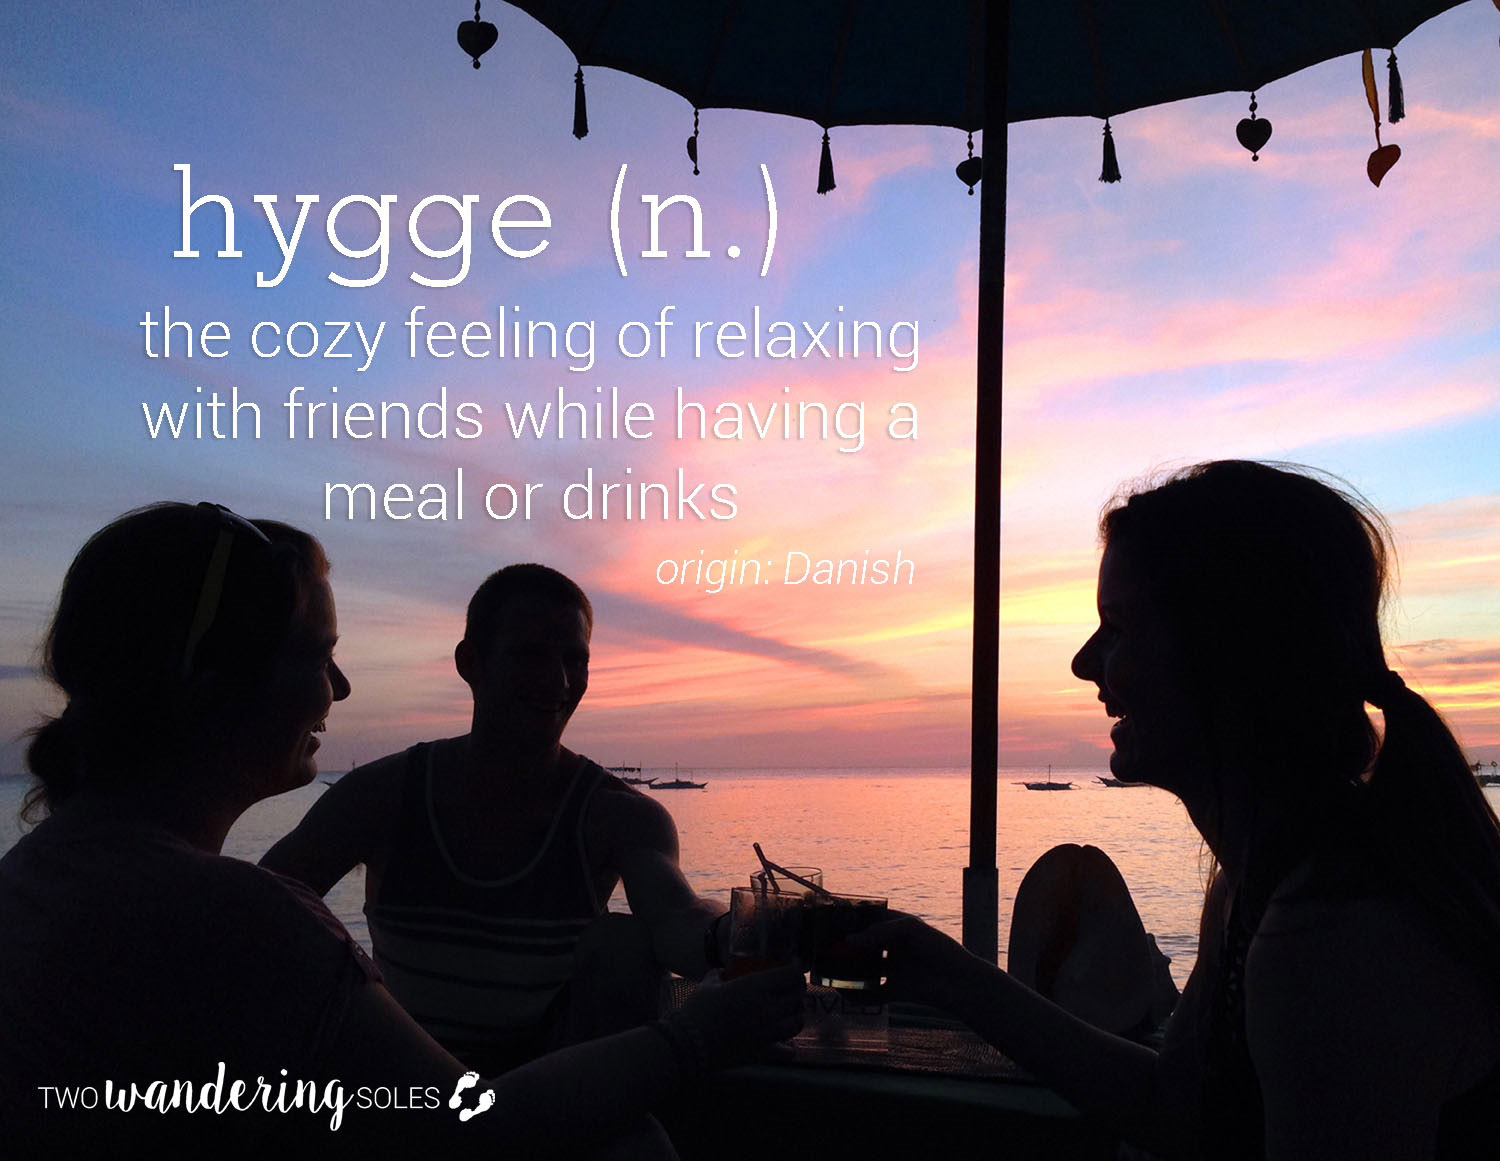 How to Choose a Blog Name Hygge Awesome Travel Words